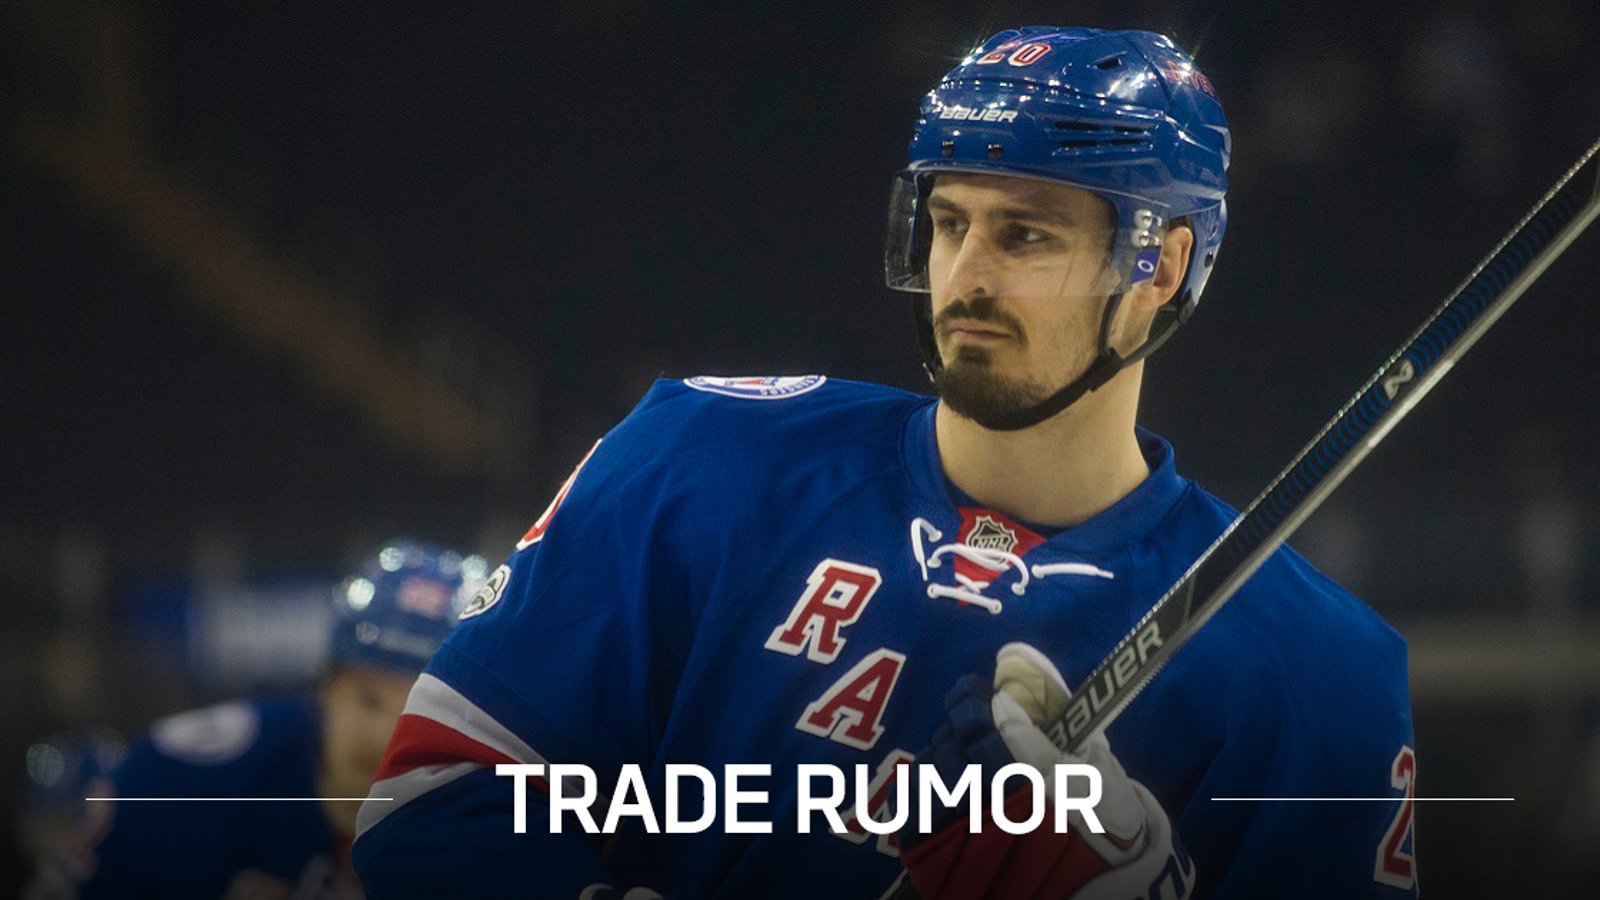 Rangers are over the salary cap and could lose a big player.